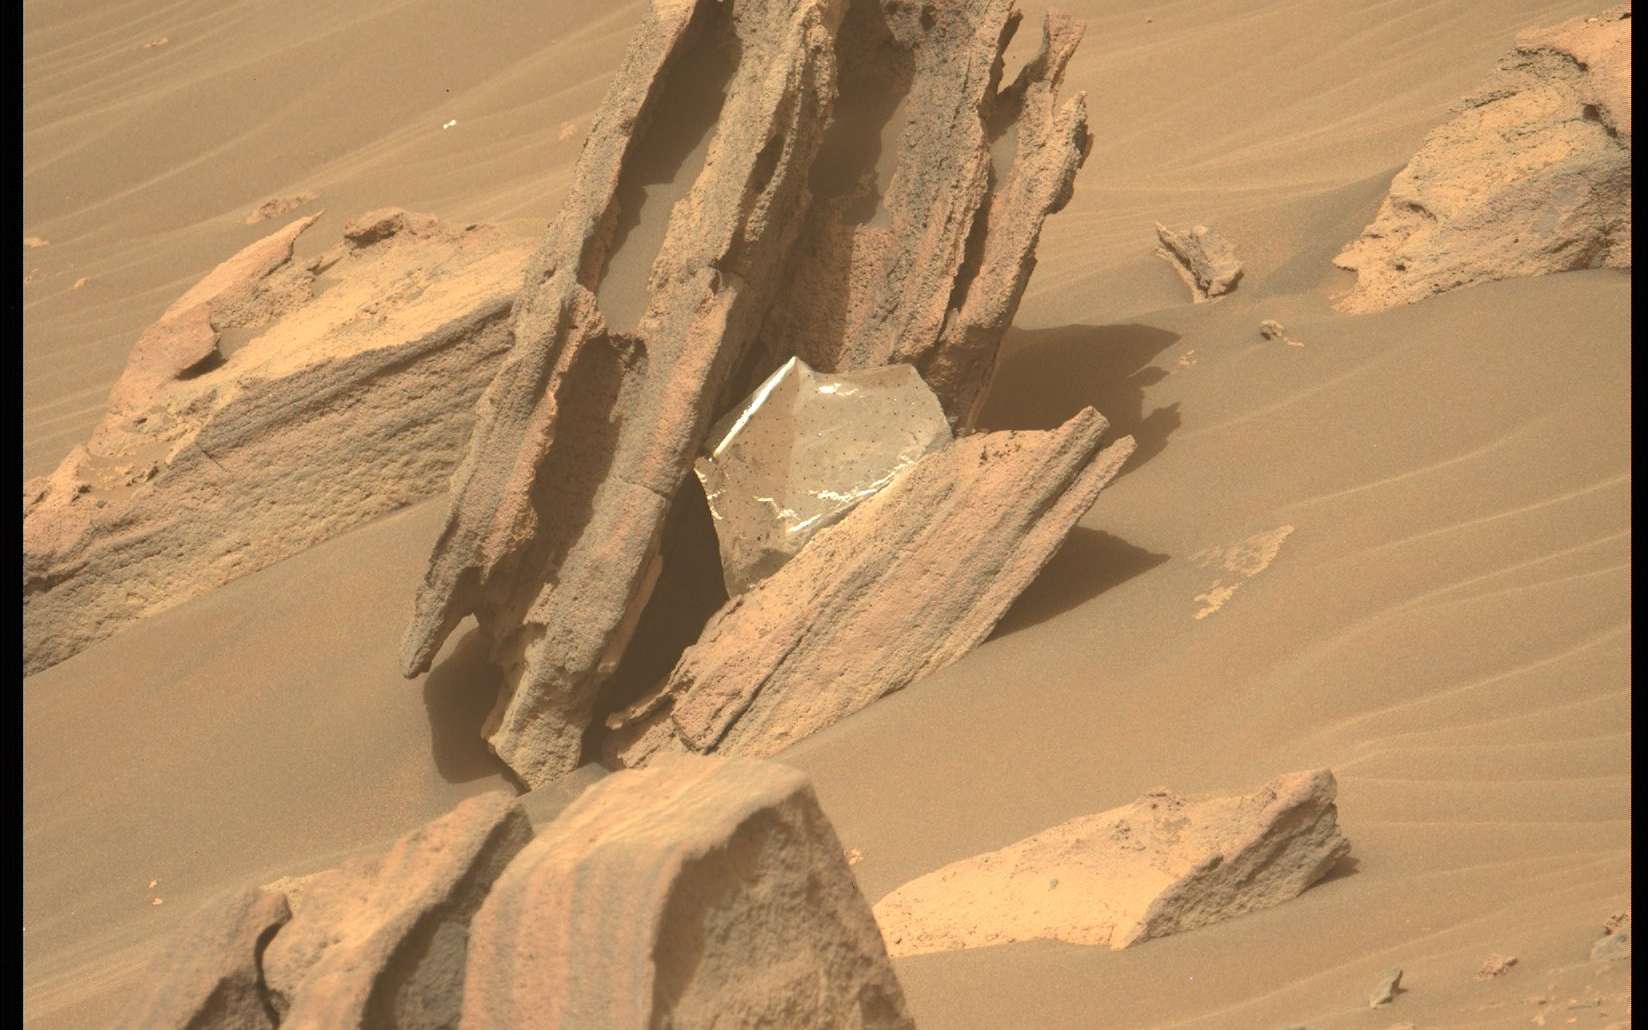 NASA wonders how this pervasive debris ended up there

